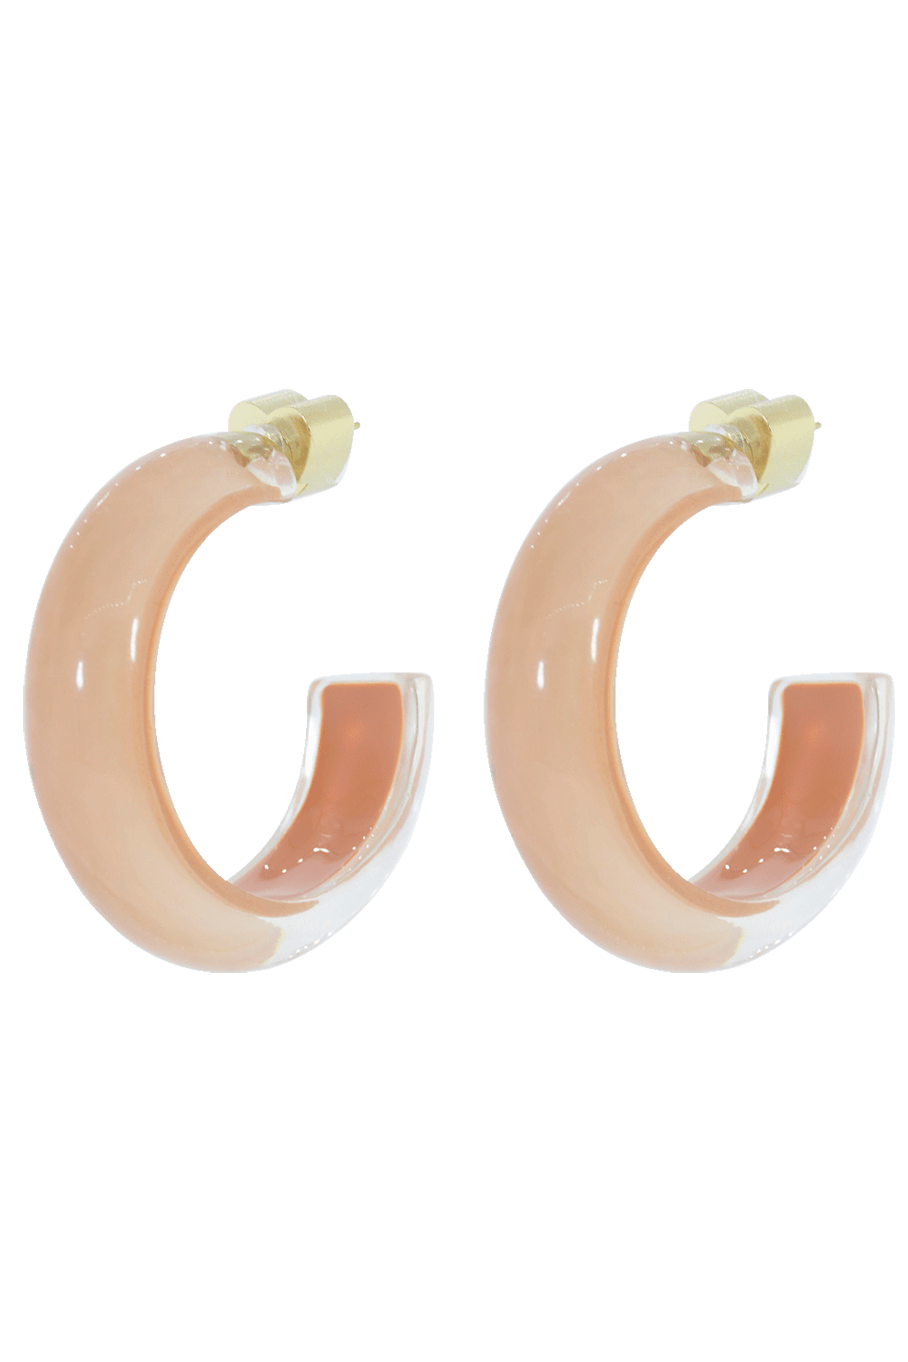 ALISON LOU-Small Peach LOUcite Jelly Hoops-YELLOW GOLD